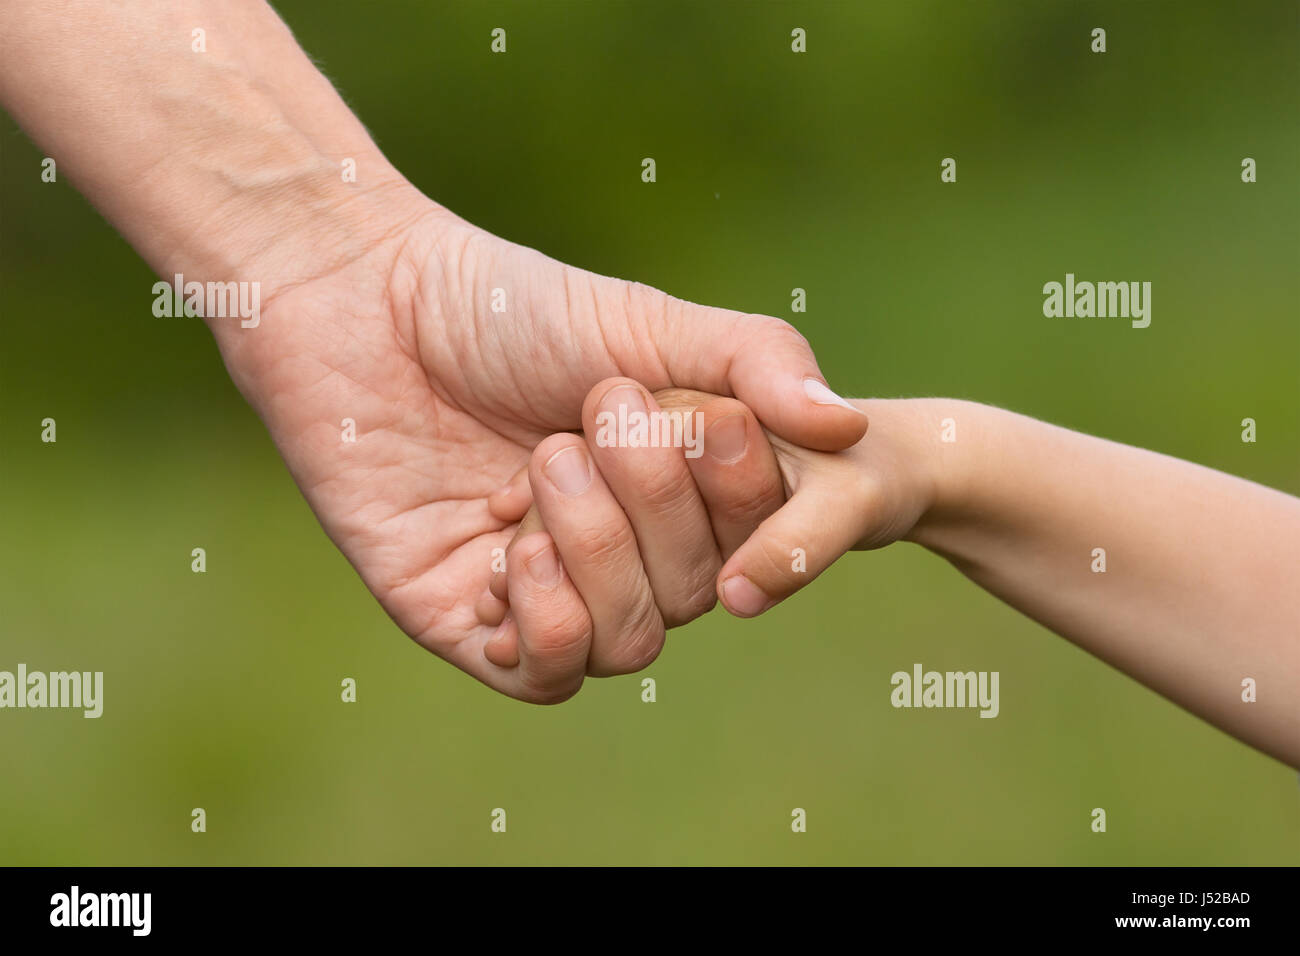 hand of adult holding child on blurred background Stock Photo